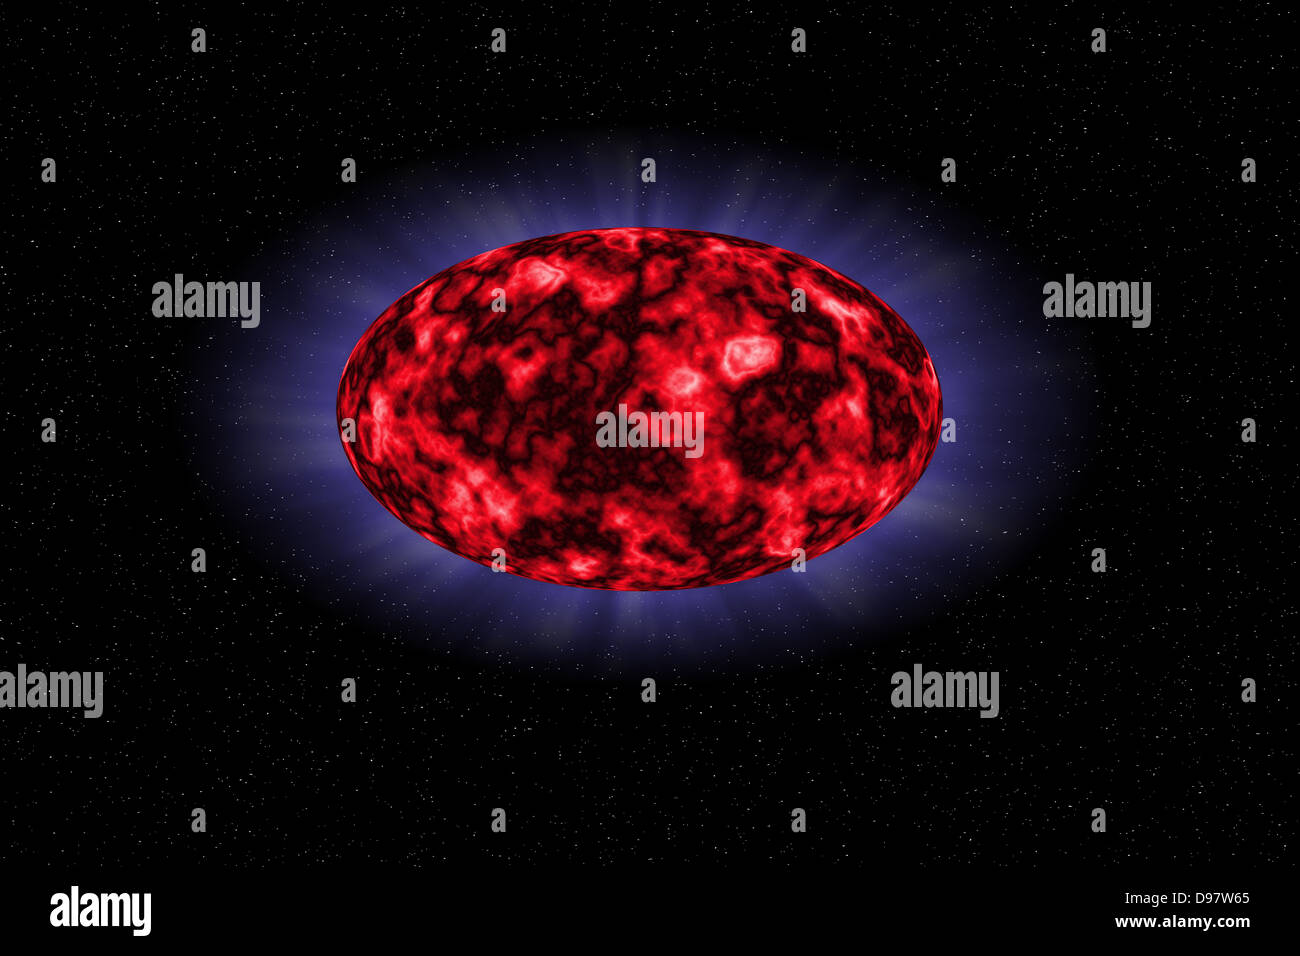 Red ellipse on the black background of space Stock Photo